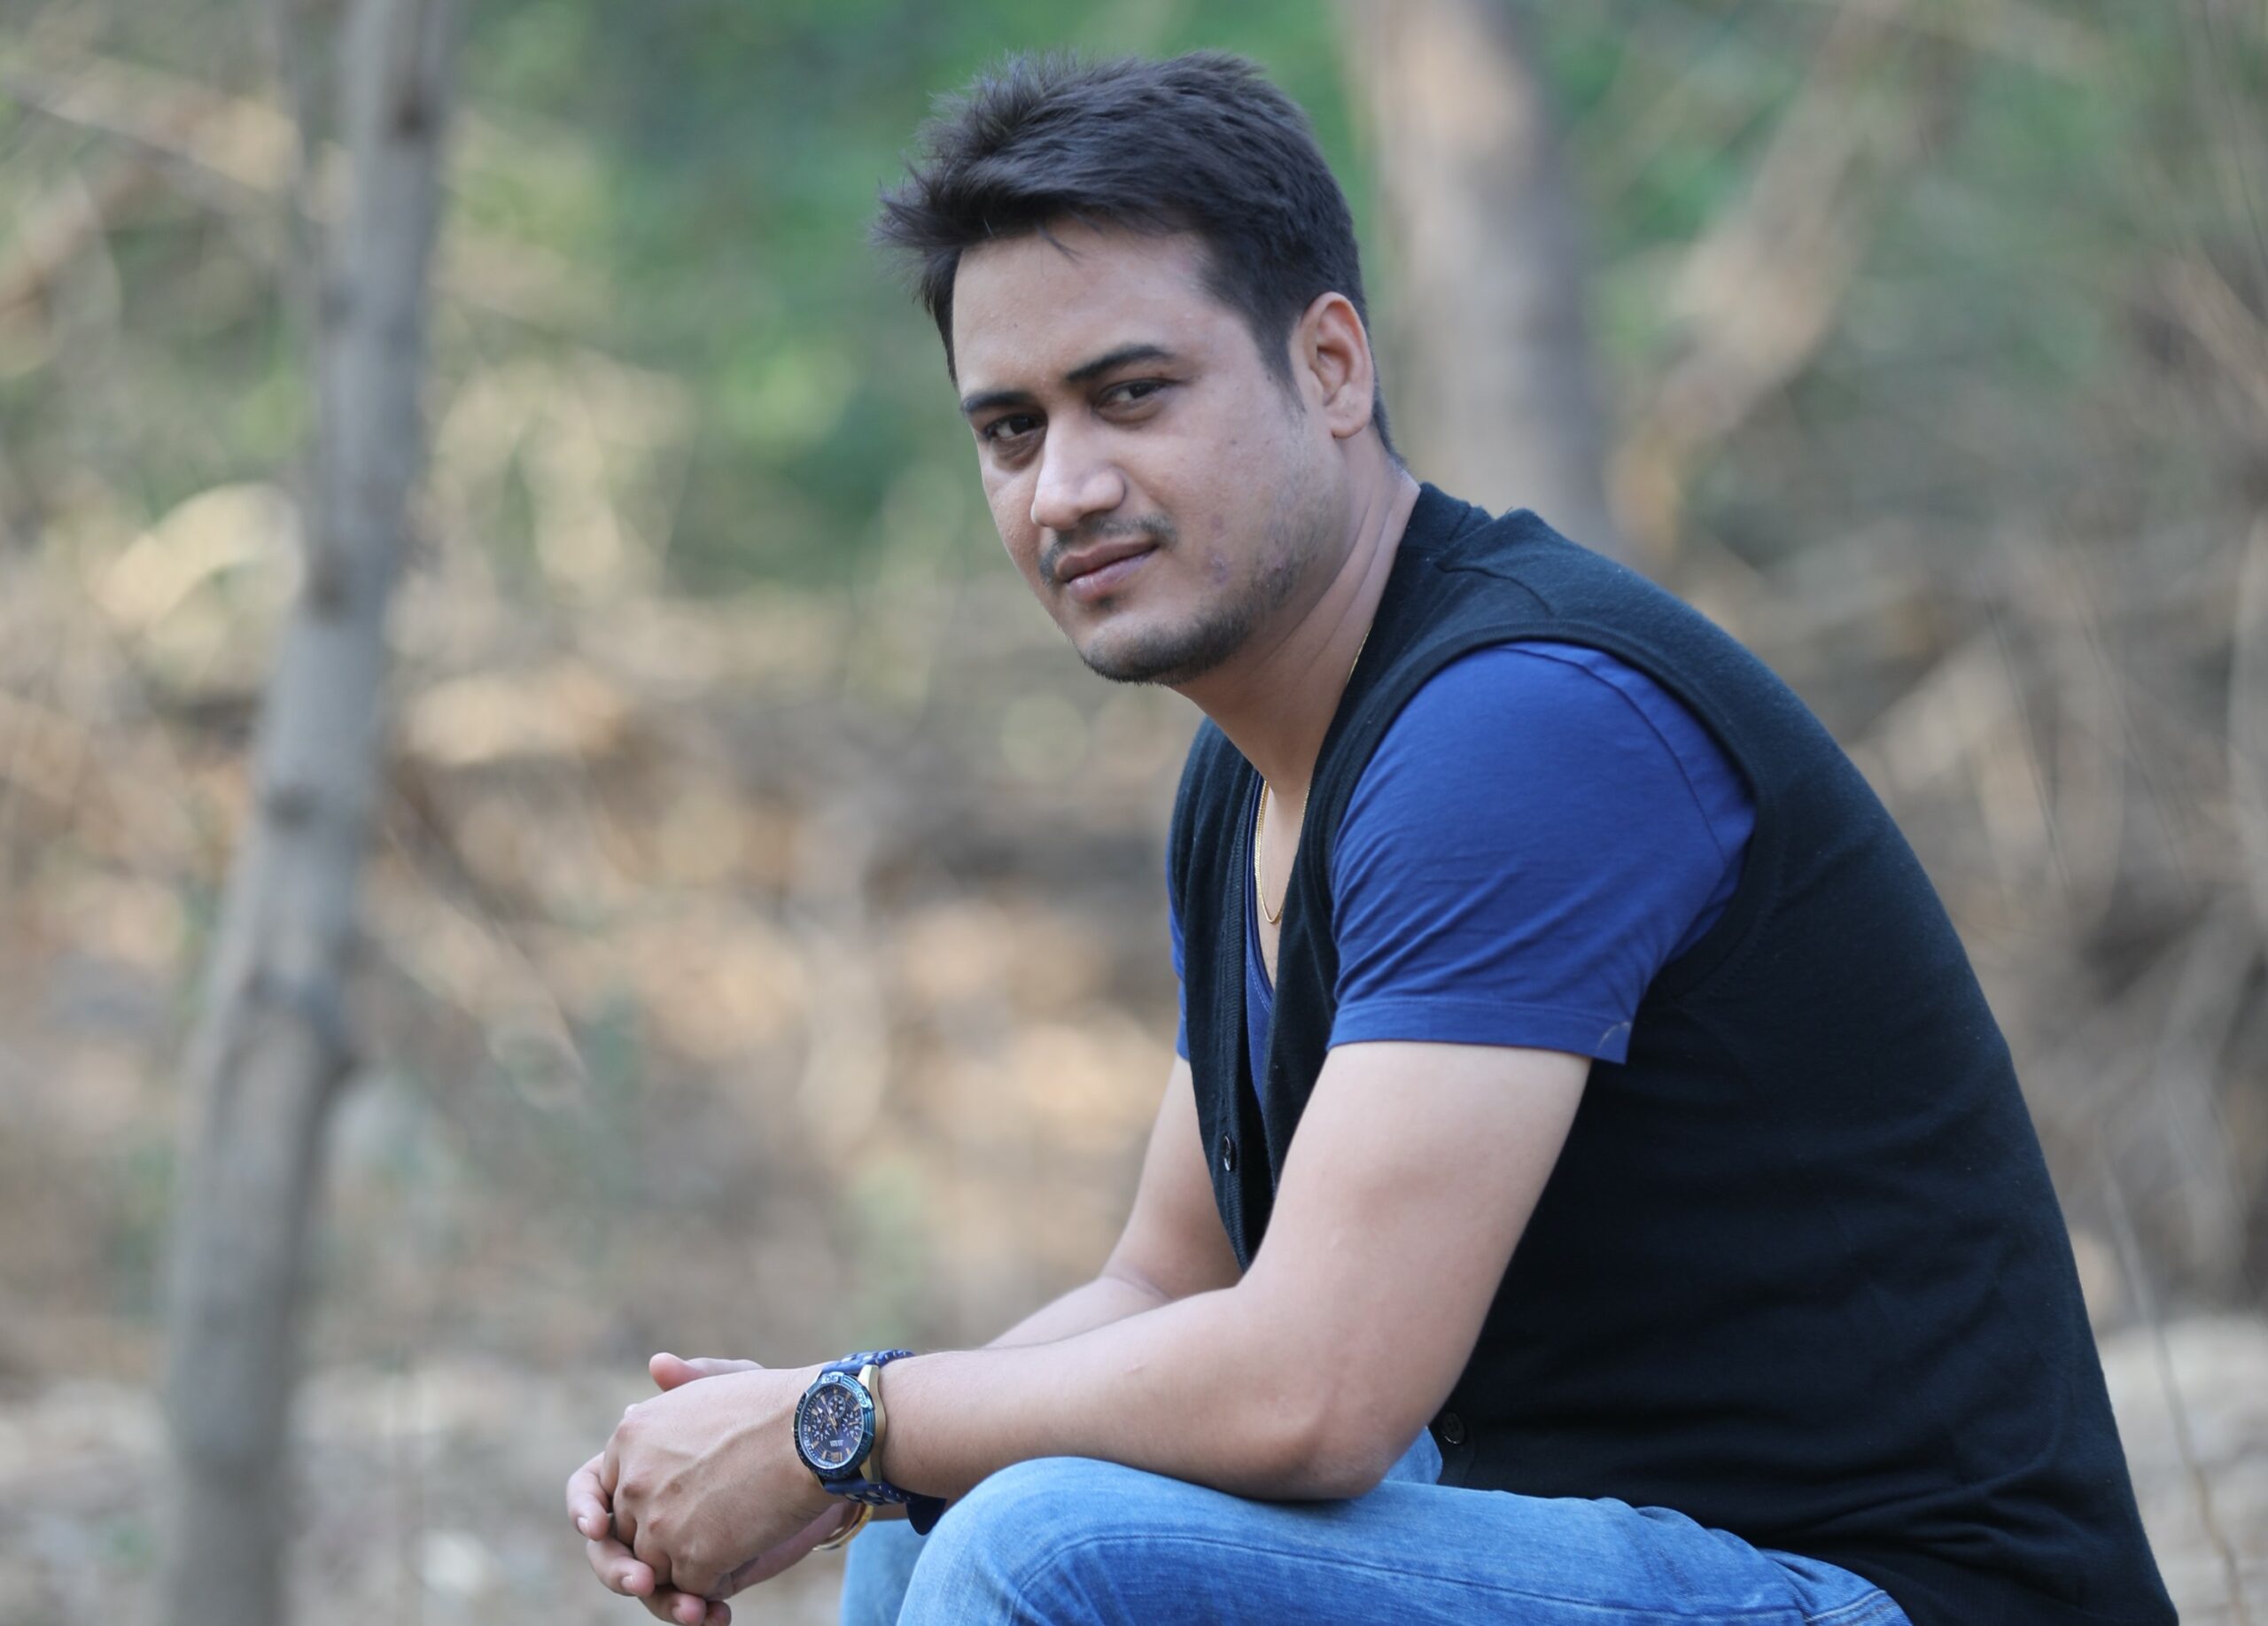 “Composing a patriotic song is a special feeling” – Vipin Patwa